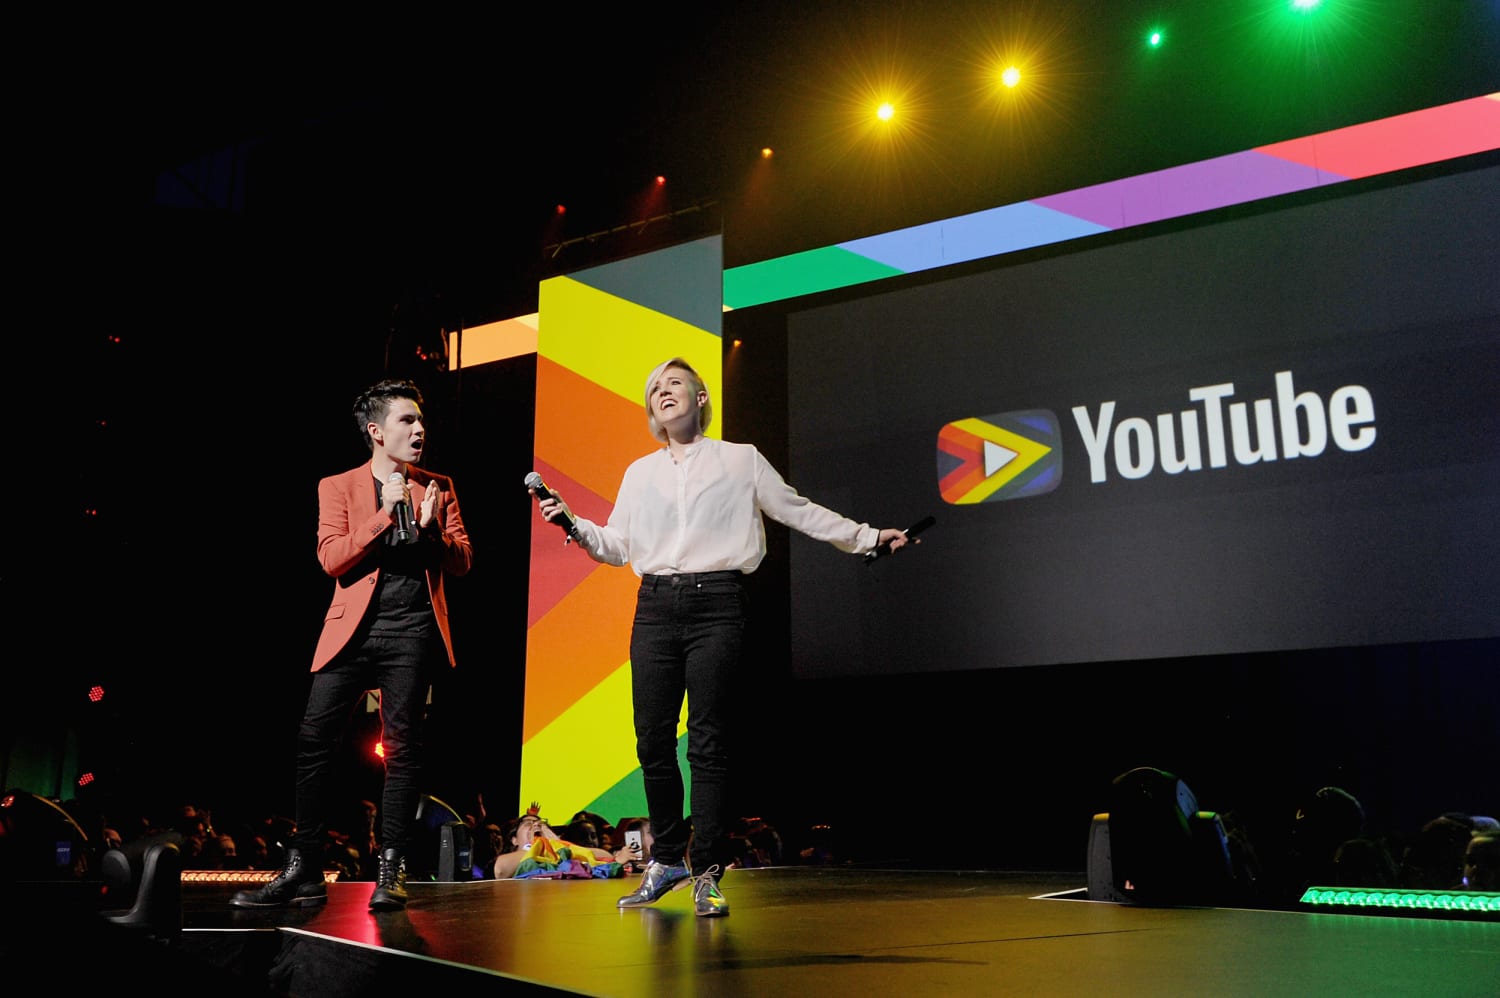 YouTube returns as the title sponsor of VidCon after TikTok's one-year stint